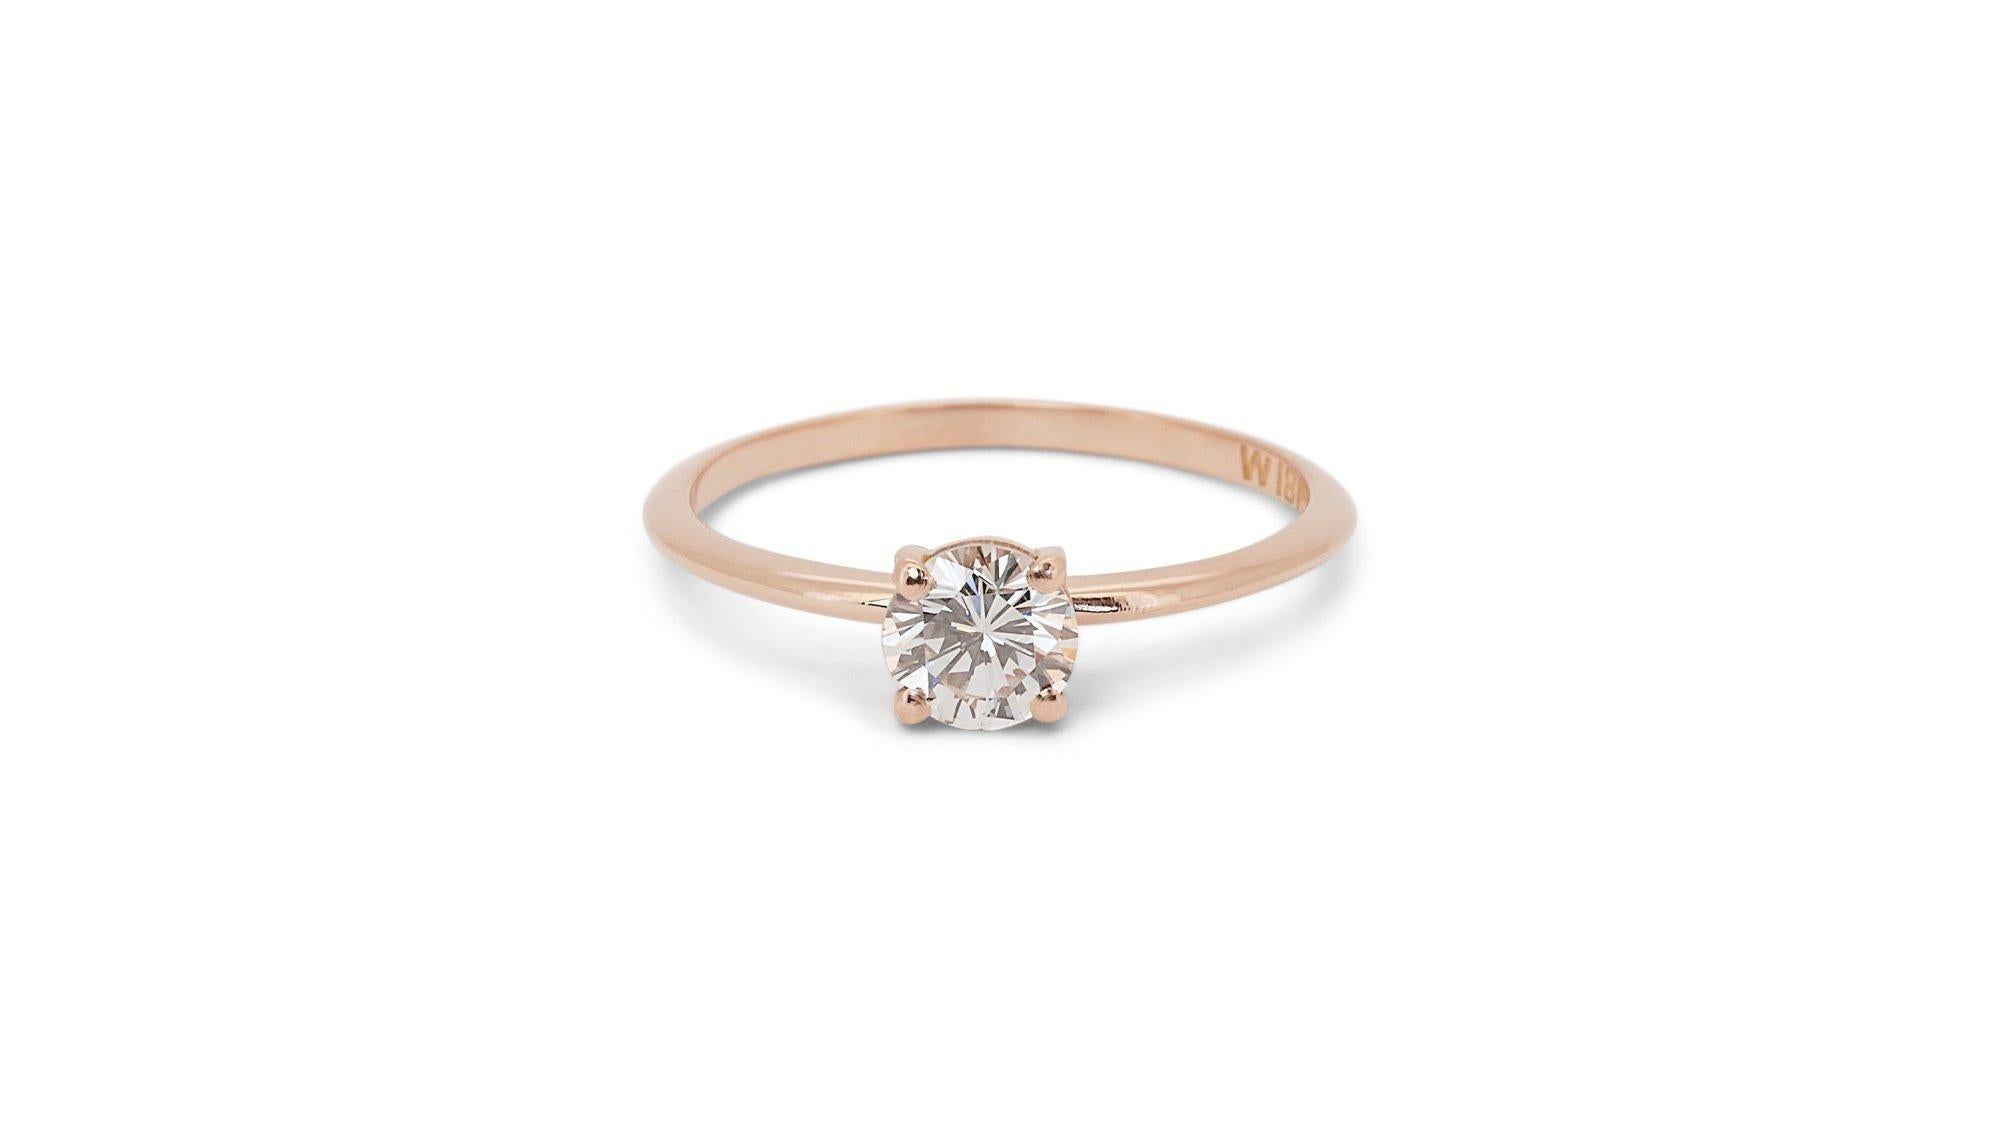 Timeless 0.80ct Diamond Solitaire Ring in 18k Rose Gold - GIA Certified For Sale 3